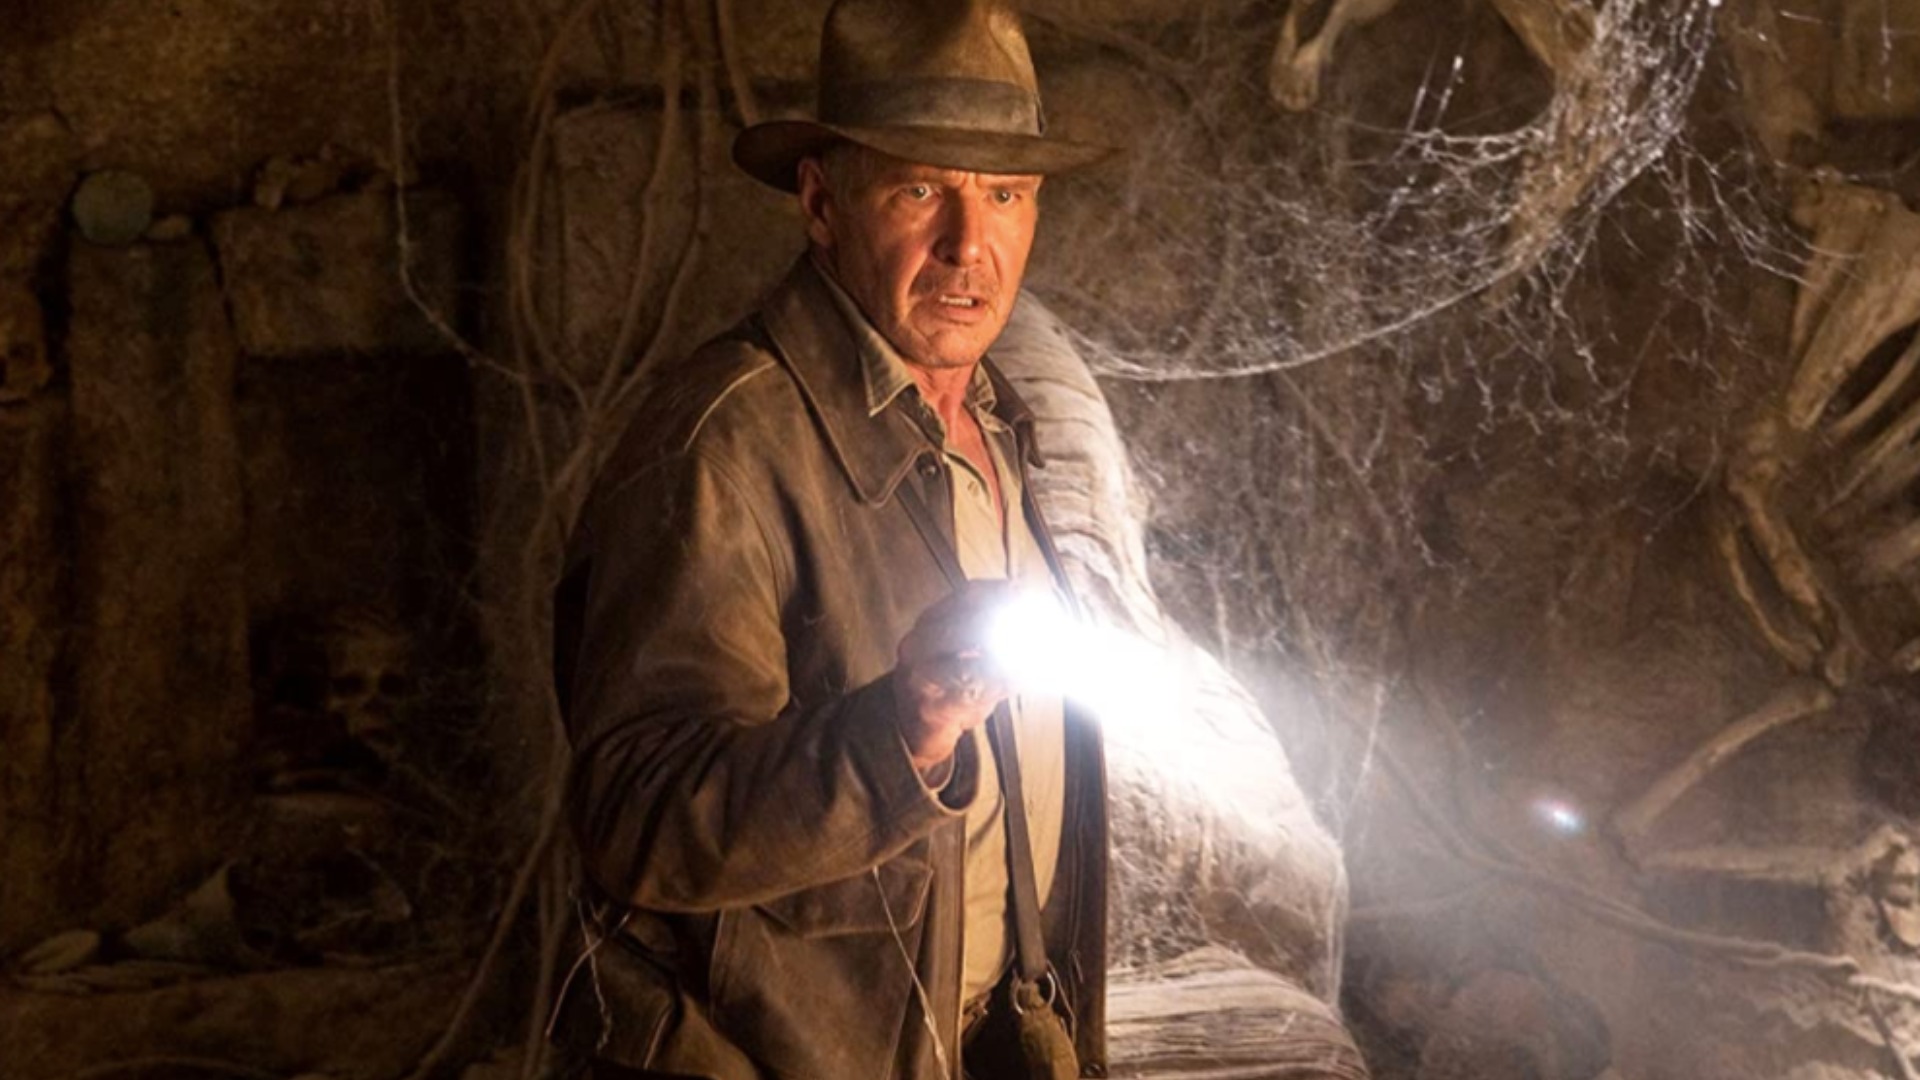 Indiana Jones 5 is currently filming in Italy